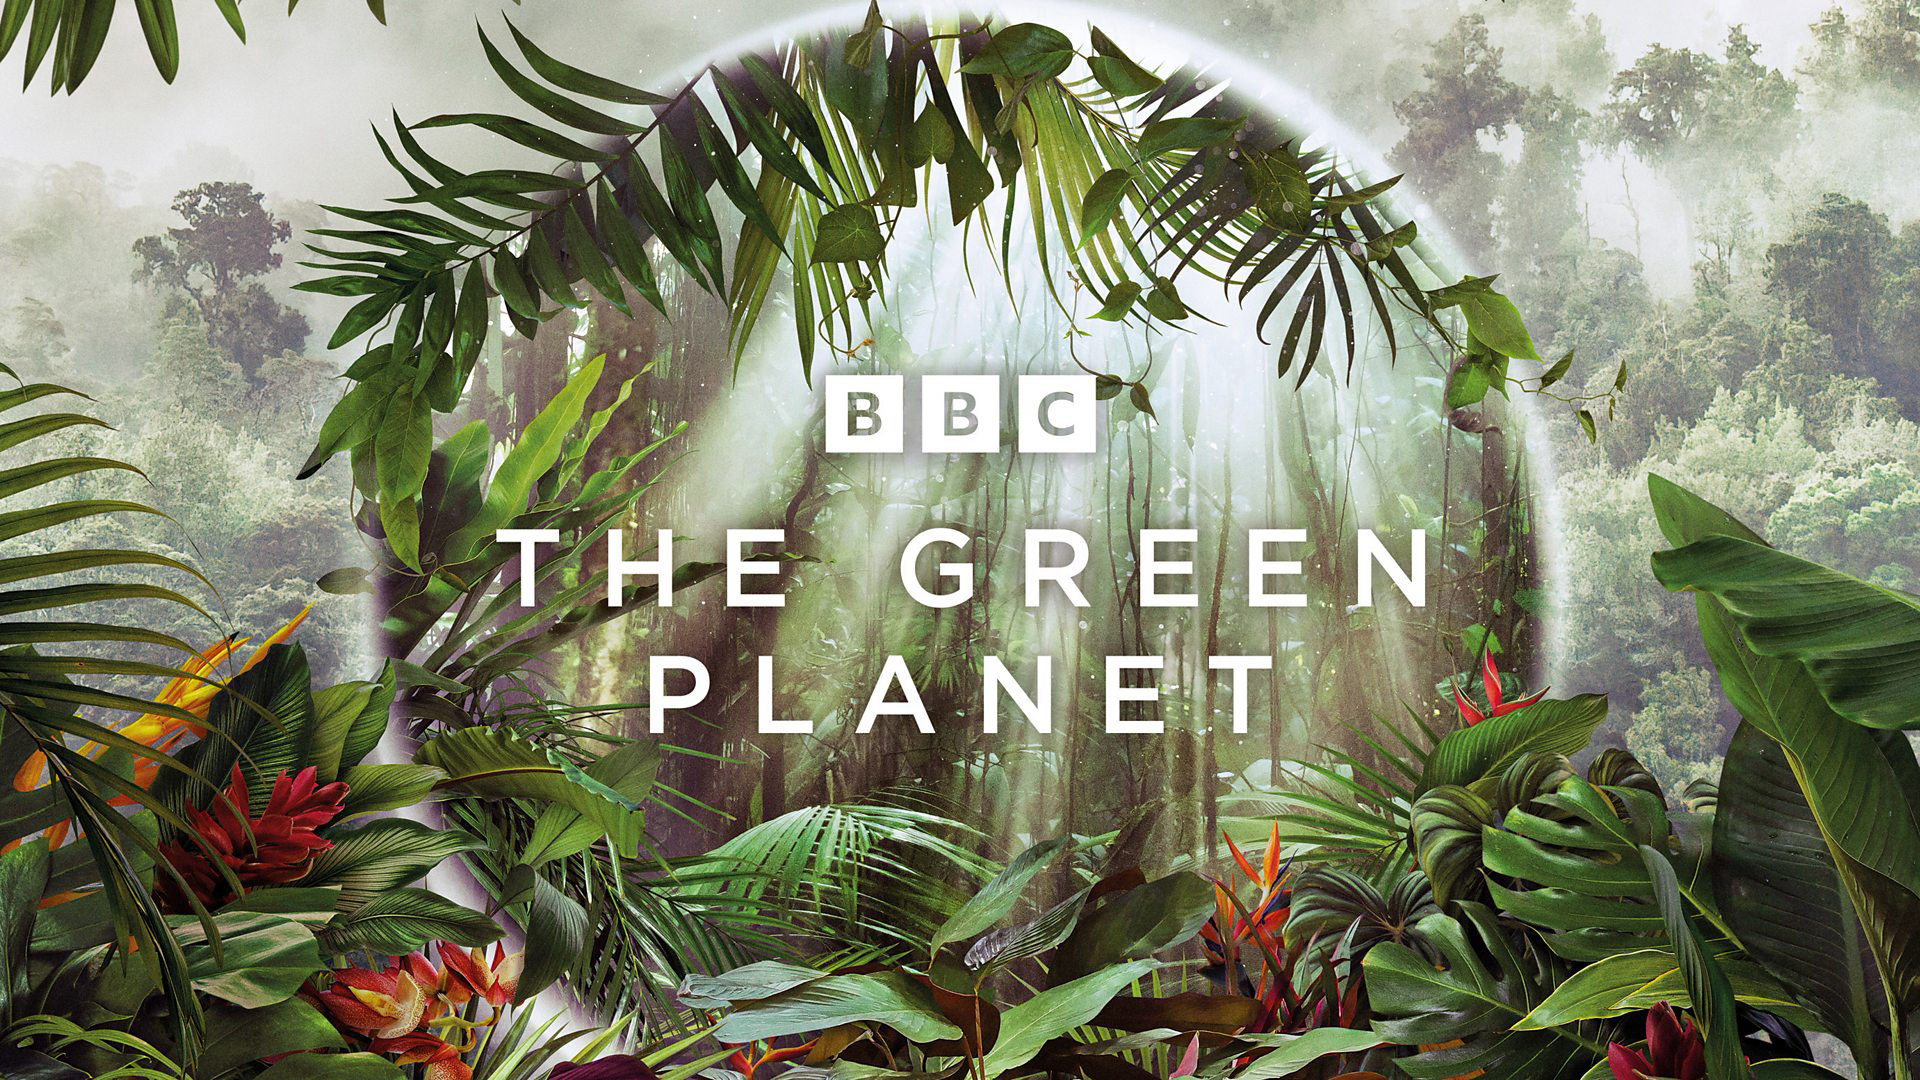 The Green Planet / The Green Planet (2022)